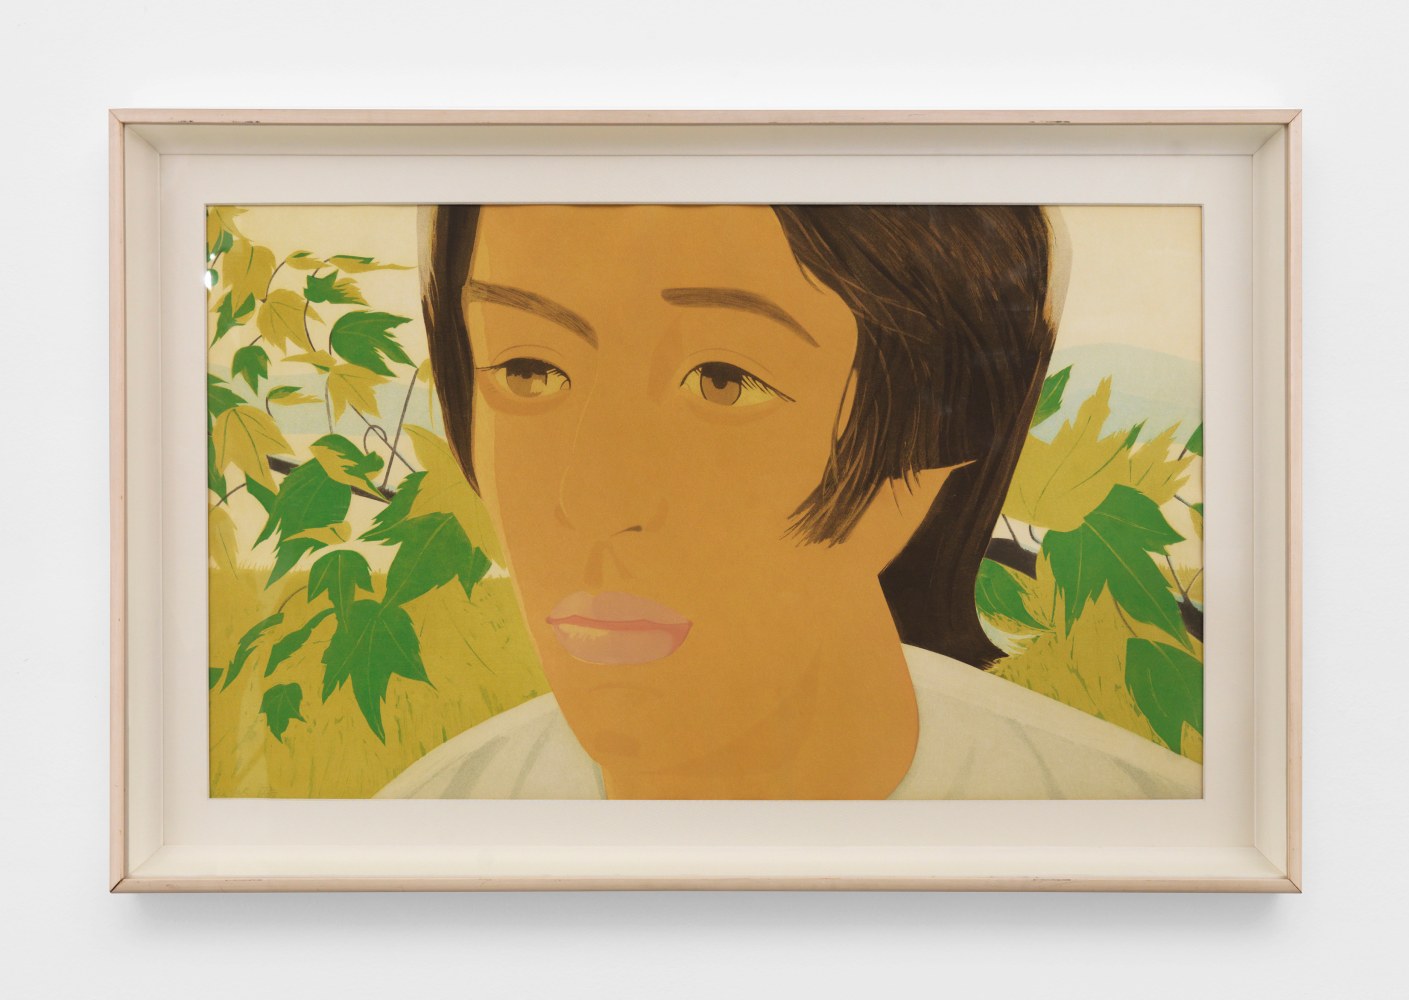 Boy with Branch I, 1975

color aquatint, edition of 90

24 1/4 x 40 1/2 in. / 62.2 x 102.9 cm